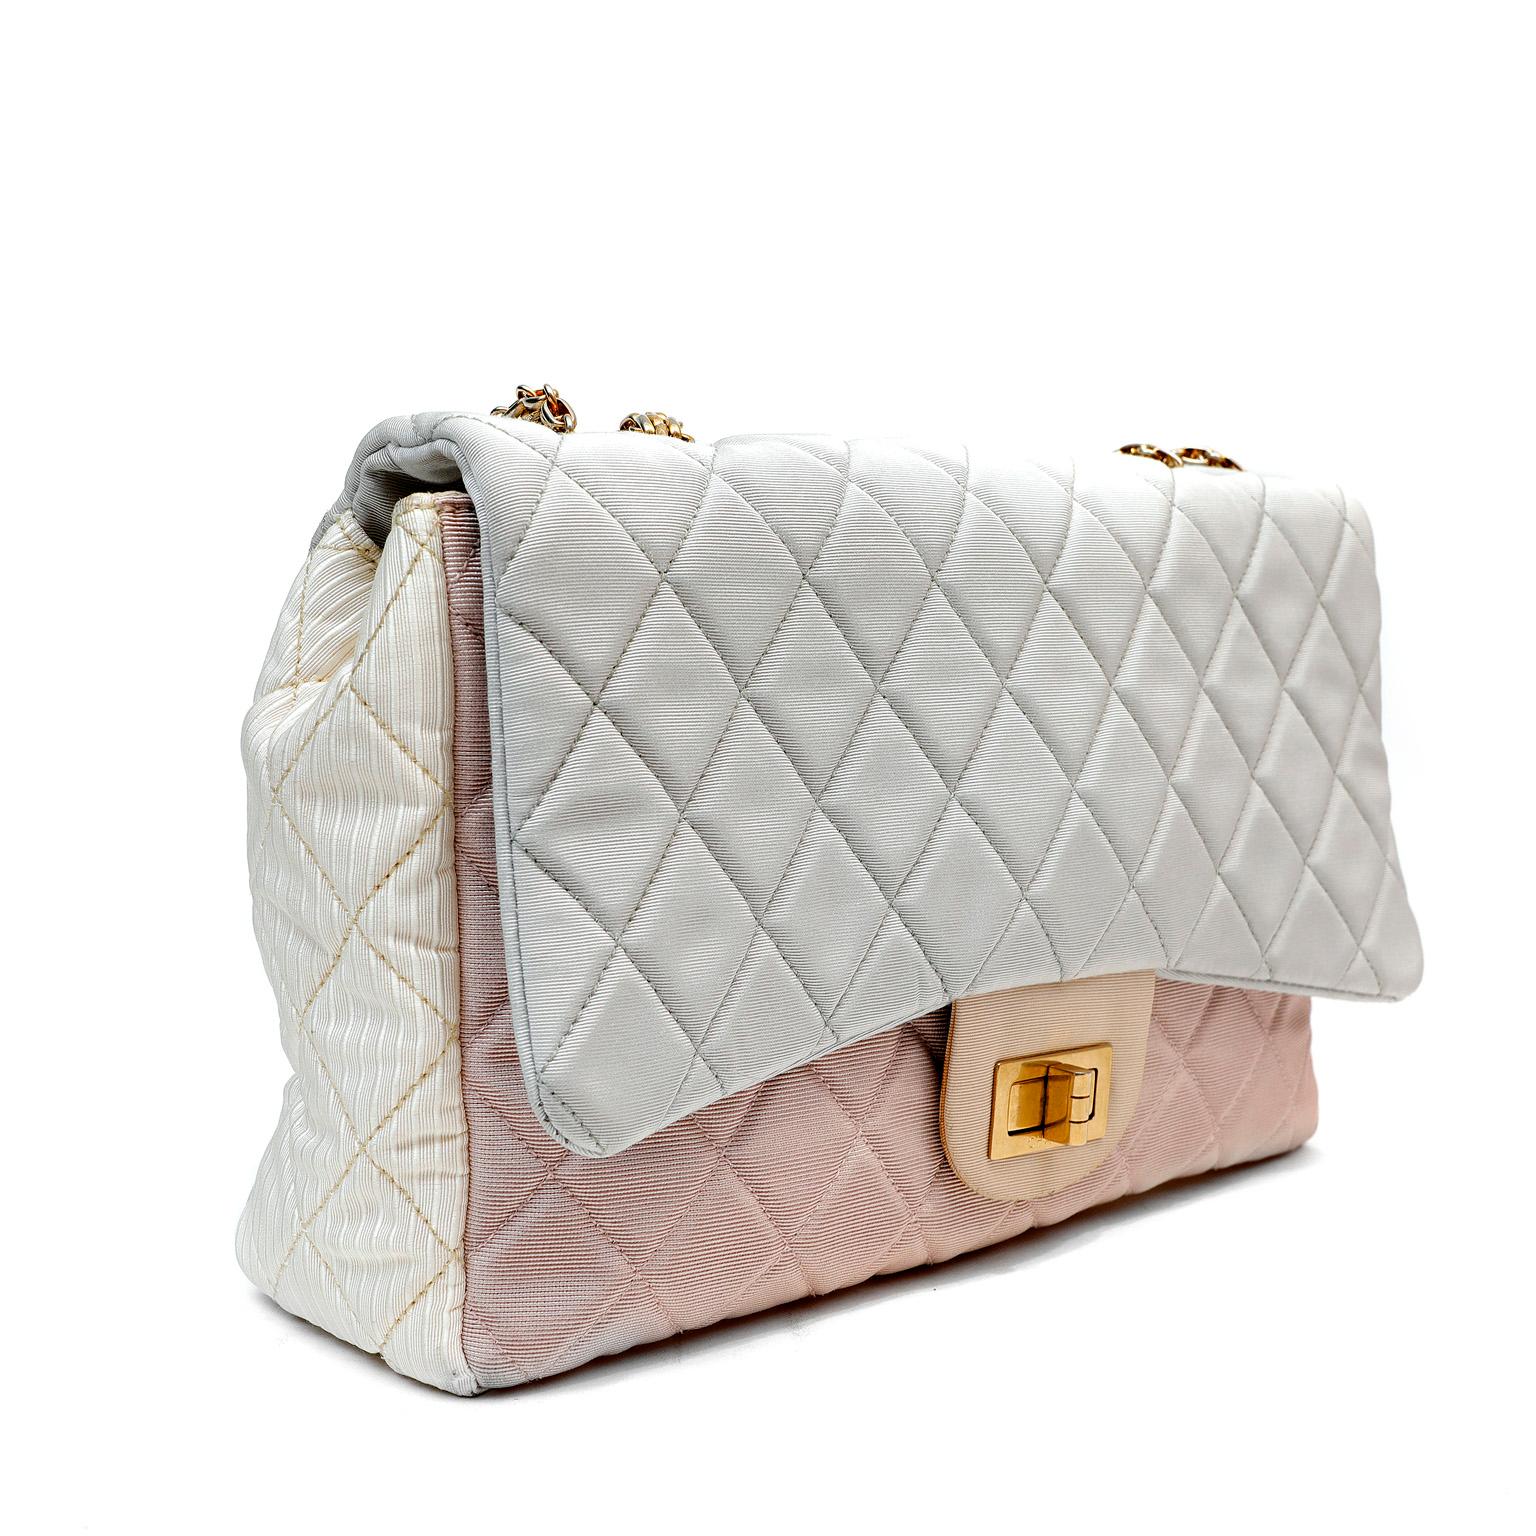 This authentic Chanel Tricolor Fabric Reissue Flap Bag is in good previously owned condition.  It is a beautiful version of the iconic reissue in feminine pastel colors.  Grosgrain fabric is quilted in signature Chanel diamond pattern in shades of